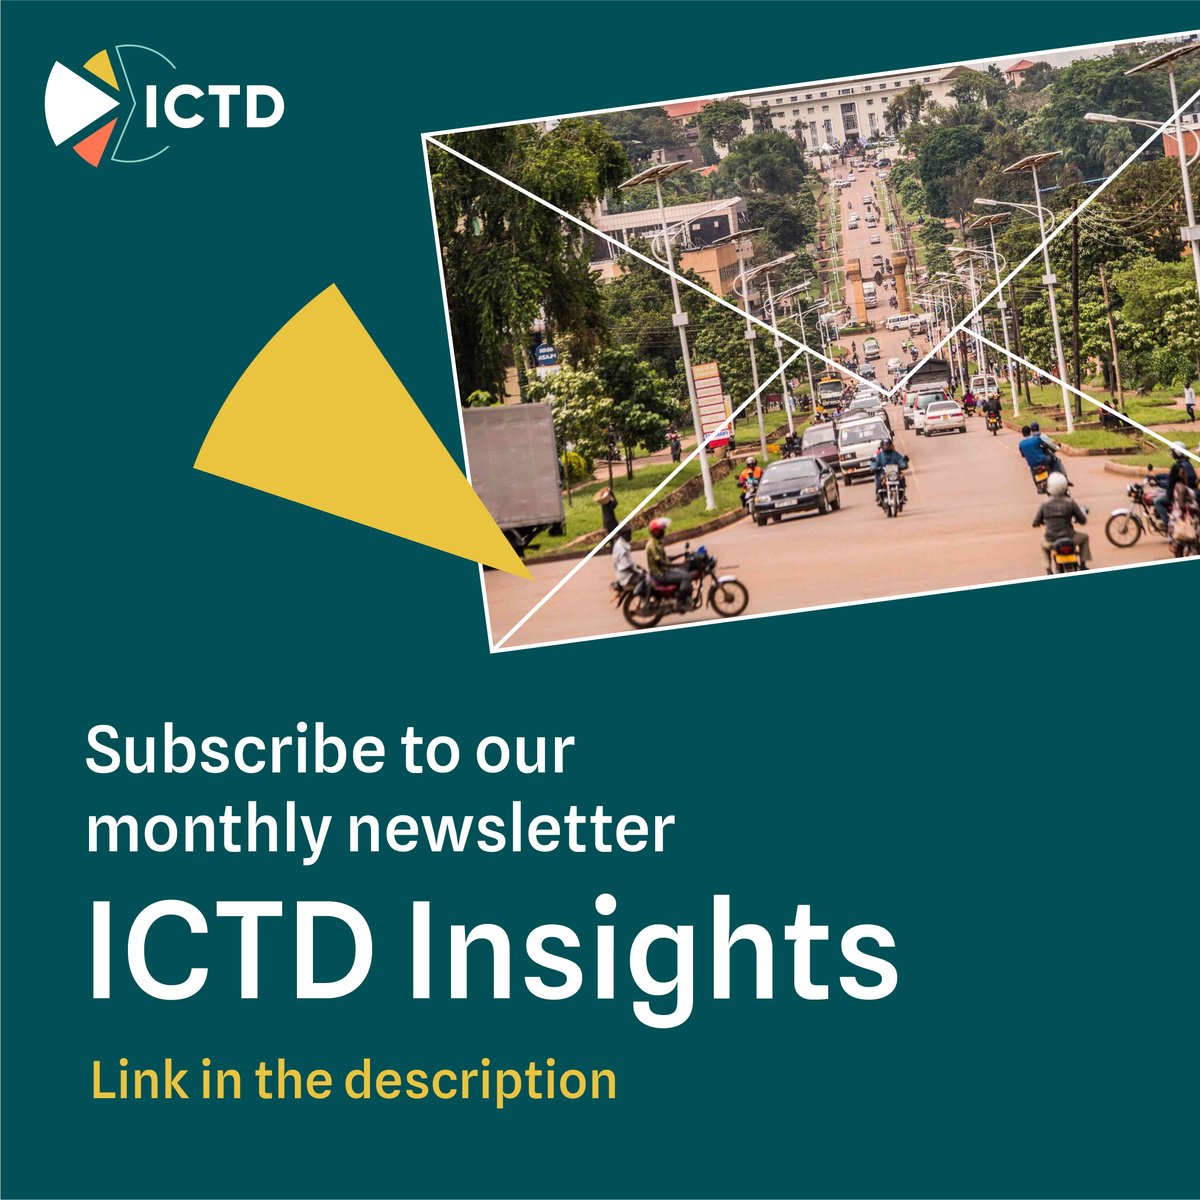 📬Have you read the latest issue of 'ICTD Insights'? 🔎In this edition, we highlight our extensive work on gender & taxation through videos, publications & much more. 🔗See here: ow.ly/TEKp50Rg3II Subscribe to the monthly newsletter➡️ow.ly/UAAG50Rg3IL #TaxTwitter